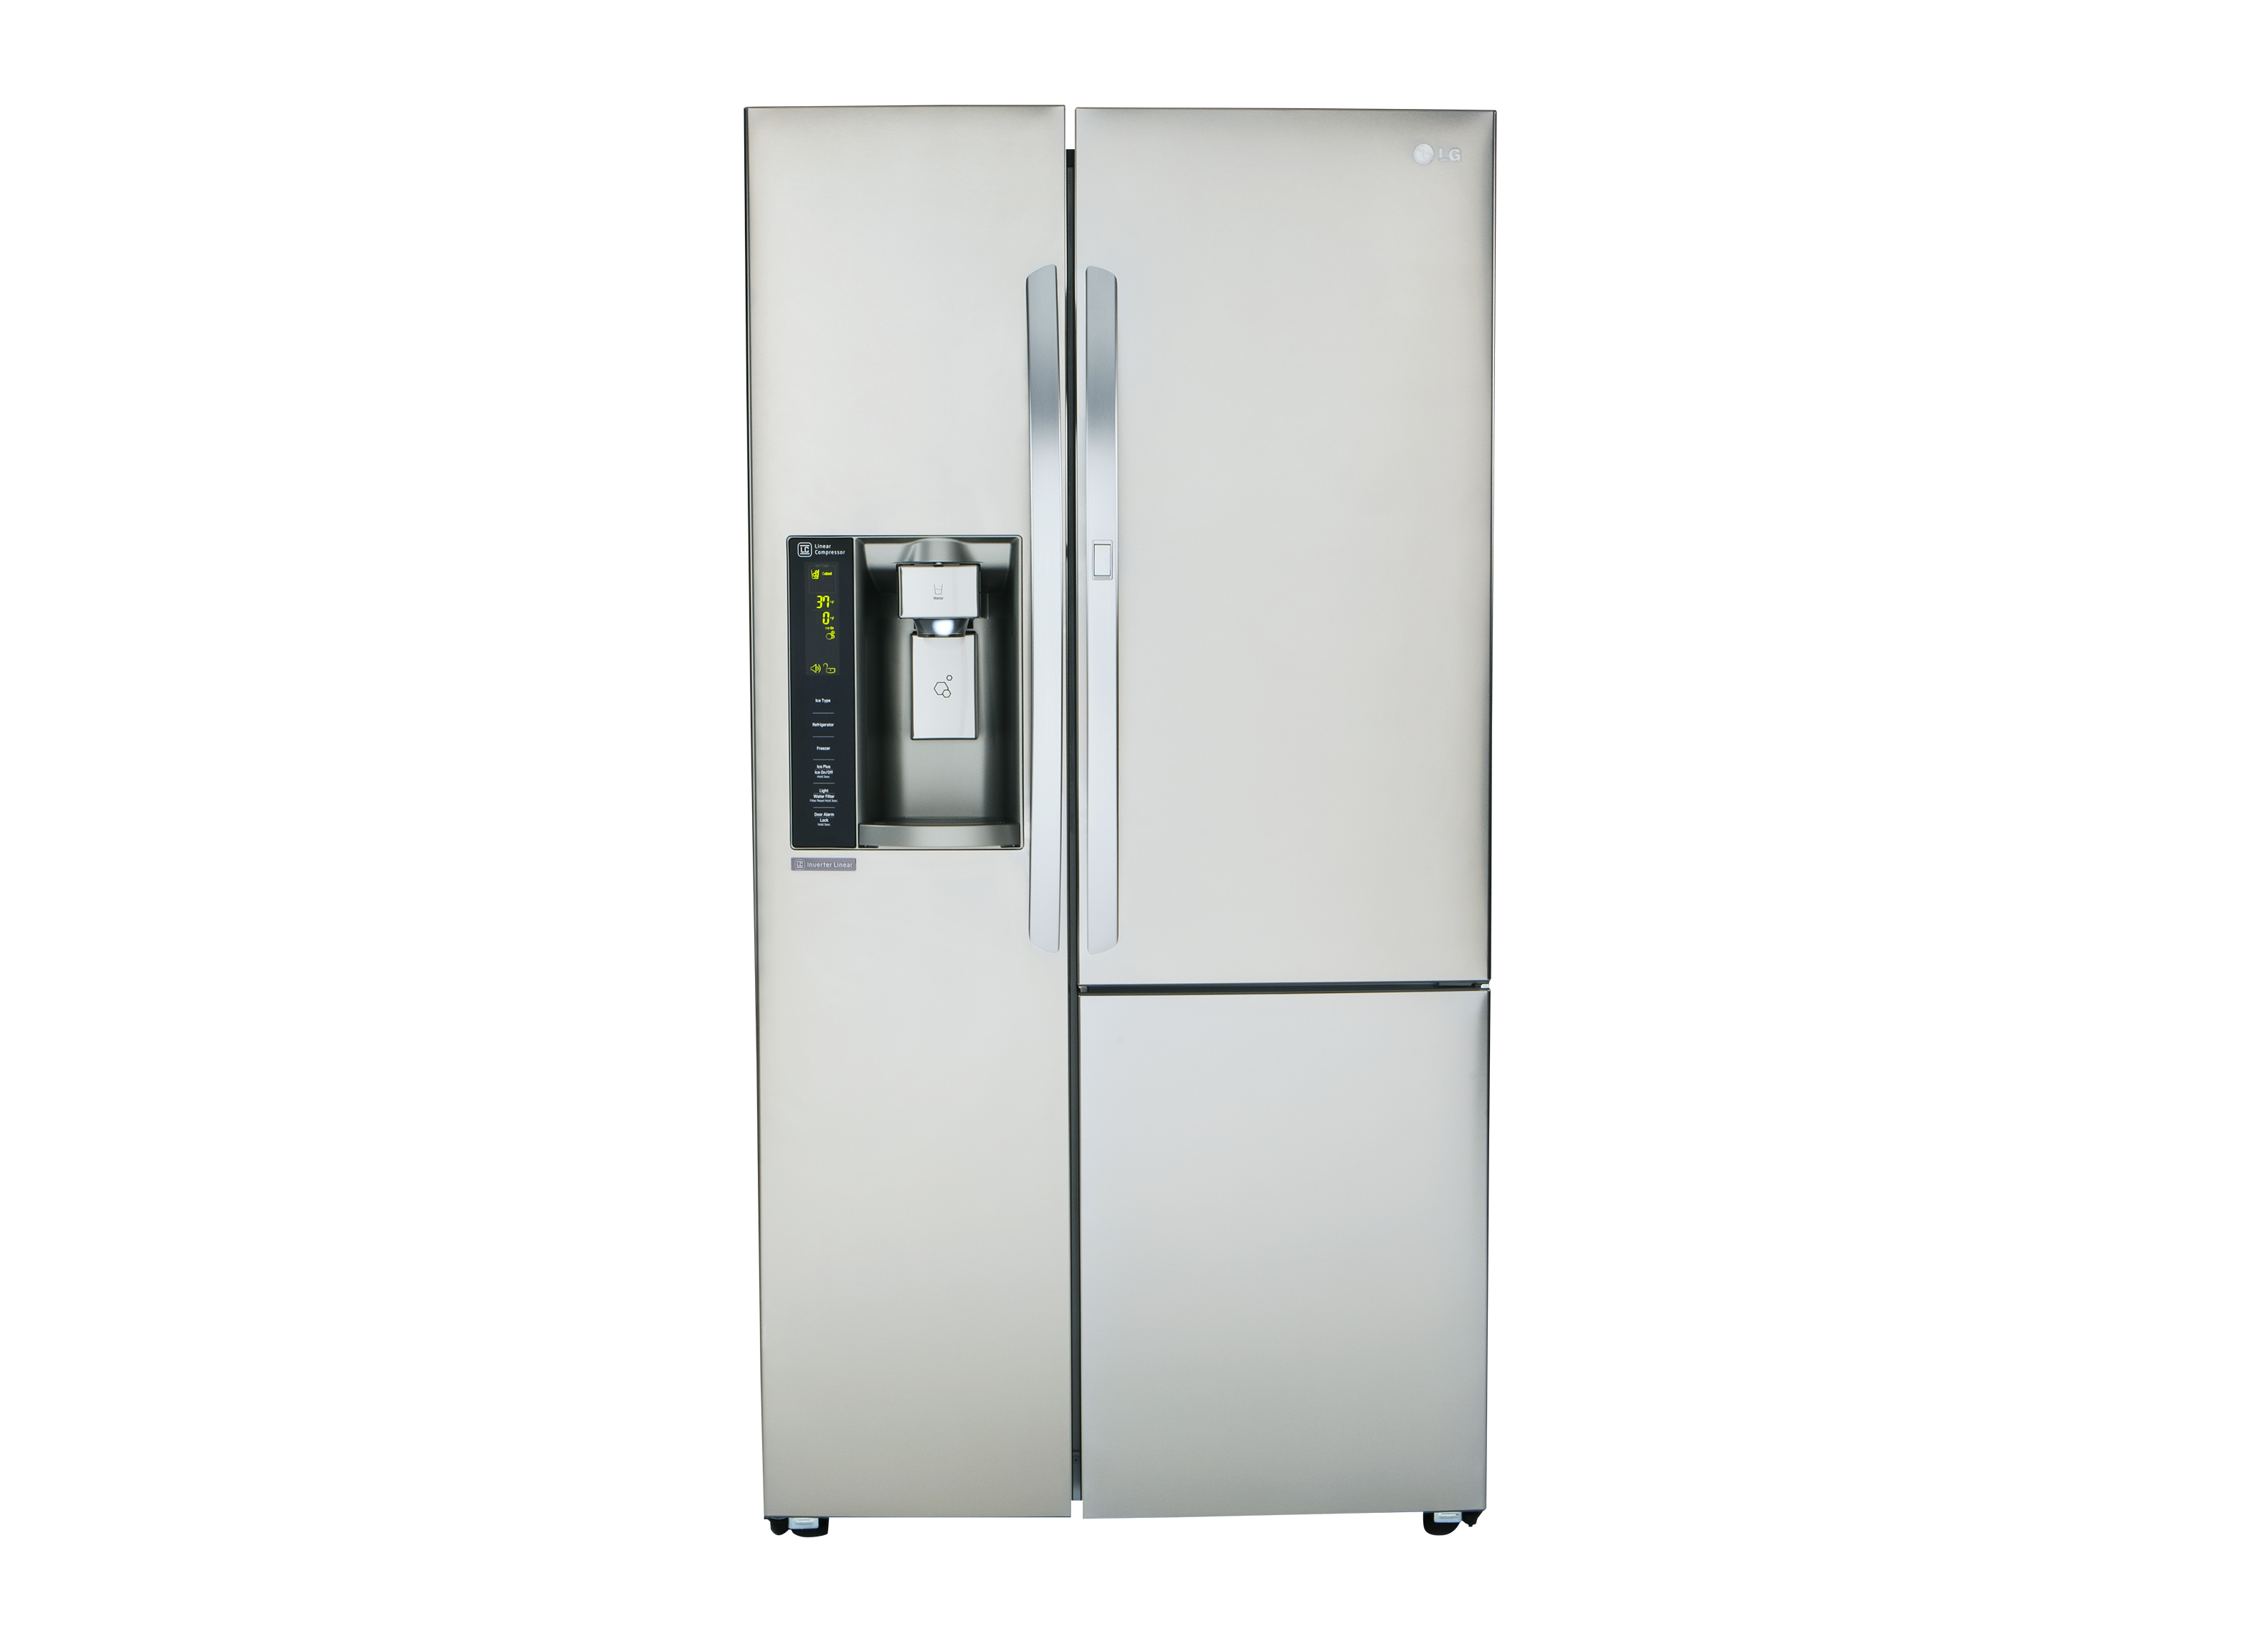 LG LSXS26366S Refrigerator Review - Consumer Reports